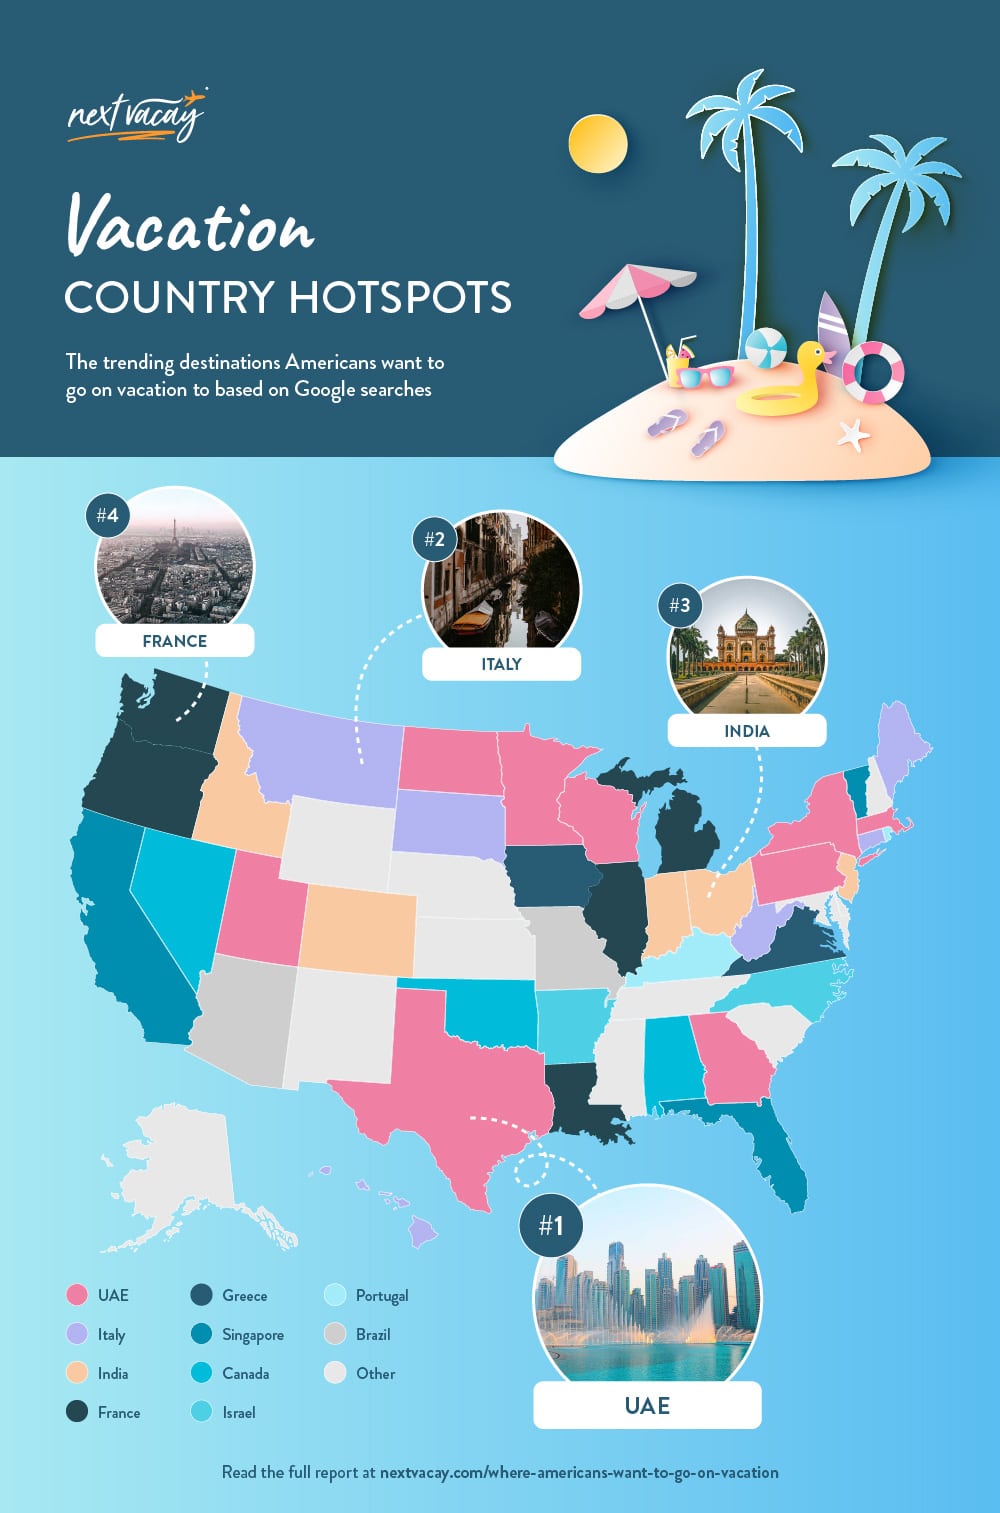 country hotspots infographic